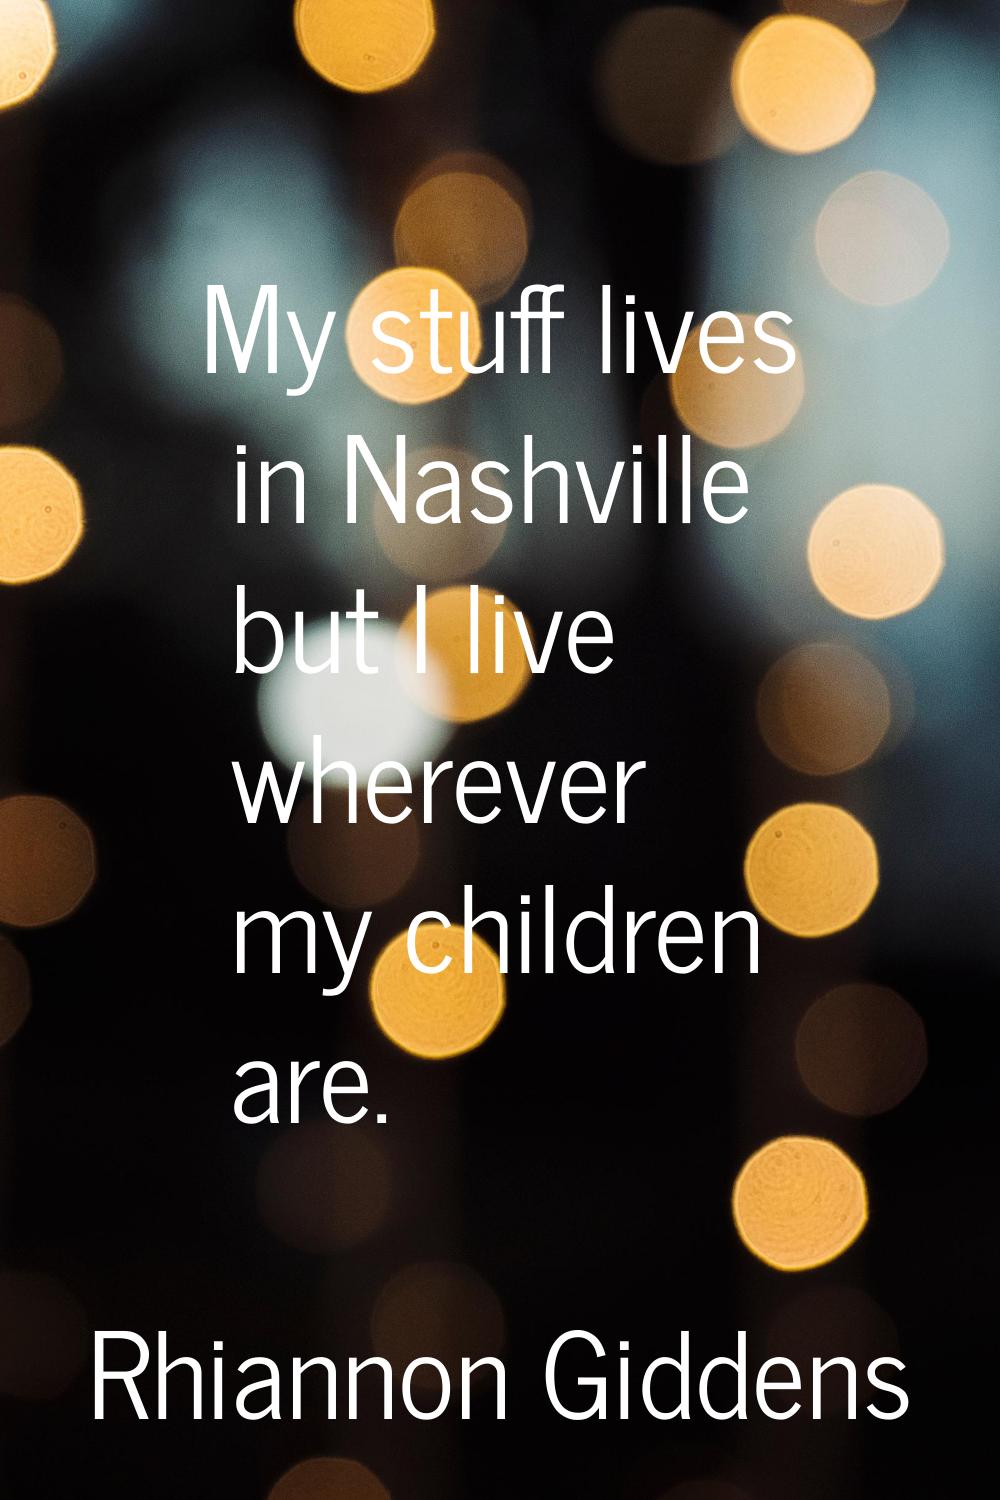 My stuff lives in Nashville but I live wherever my children are.